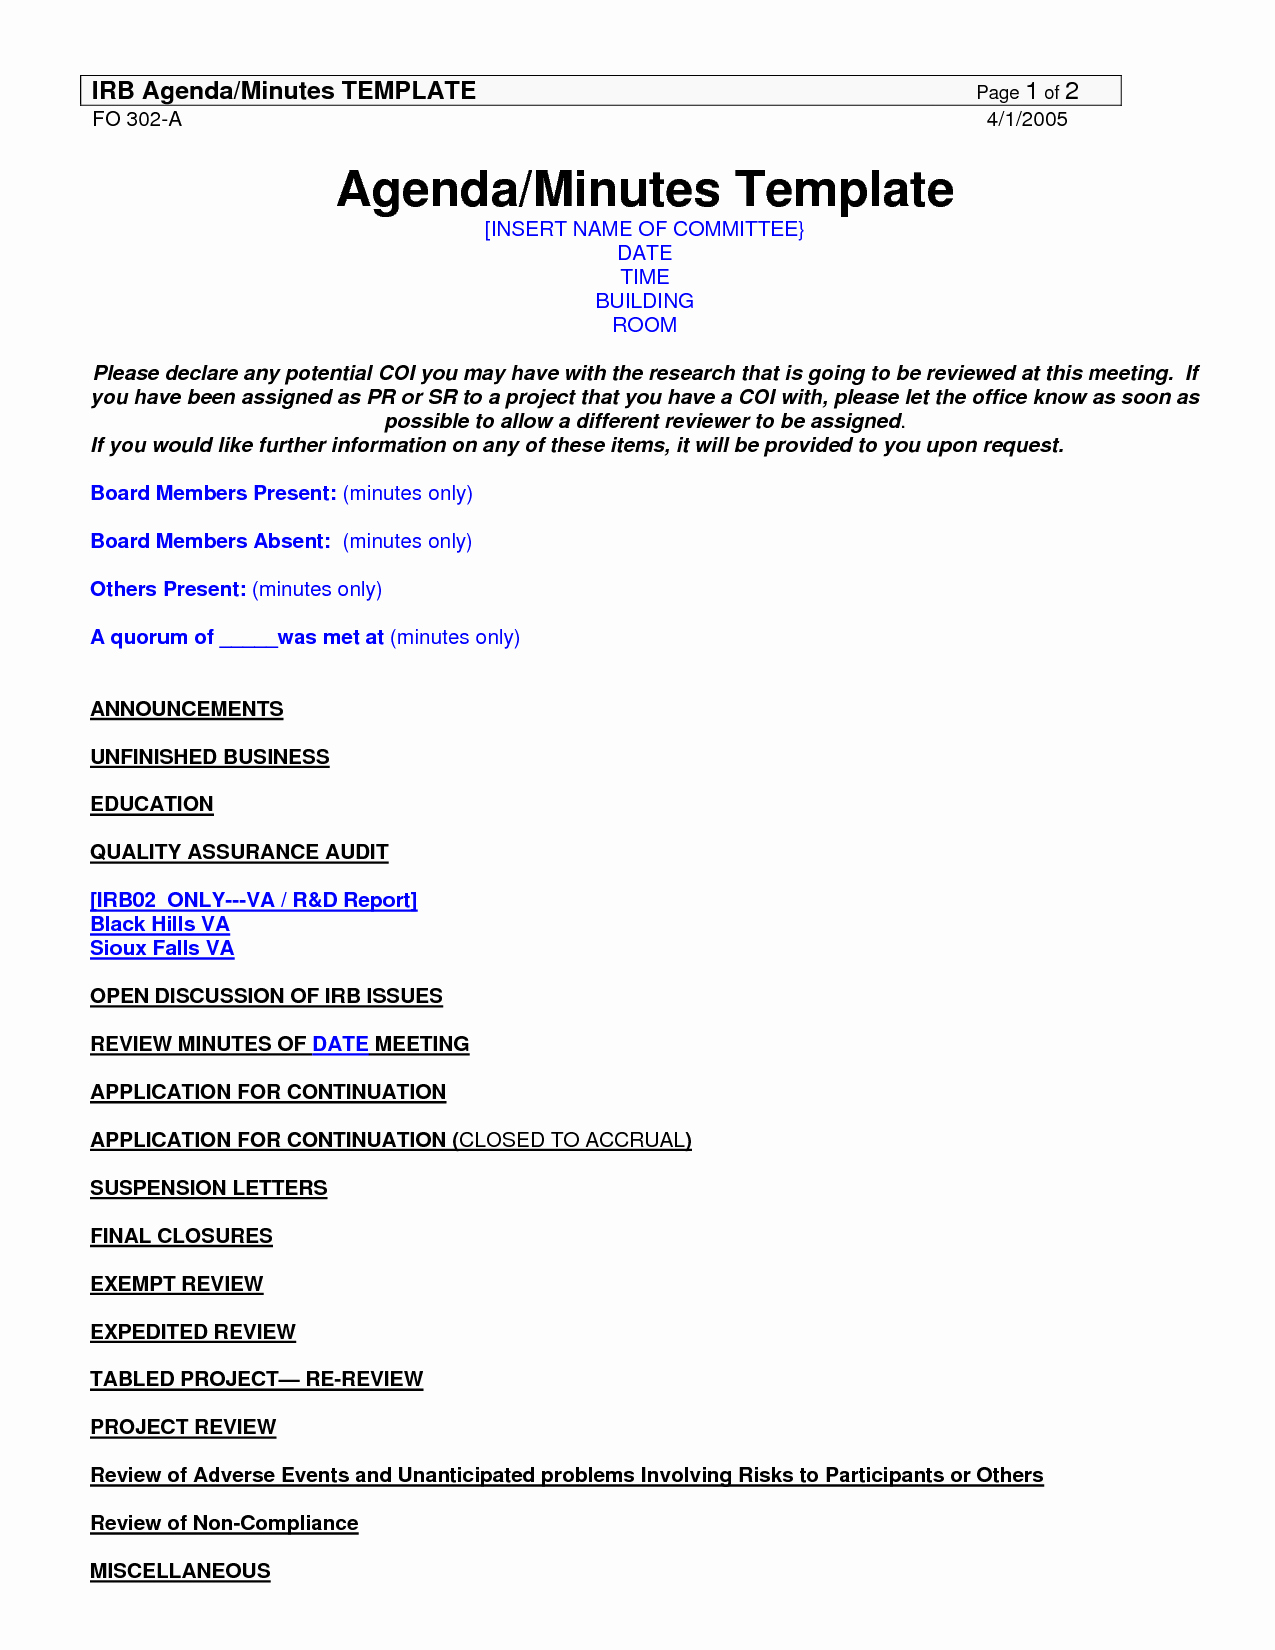 Best S Of Templates for Agenda and Minutes Meeting